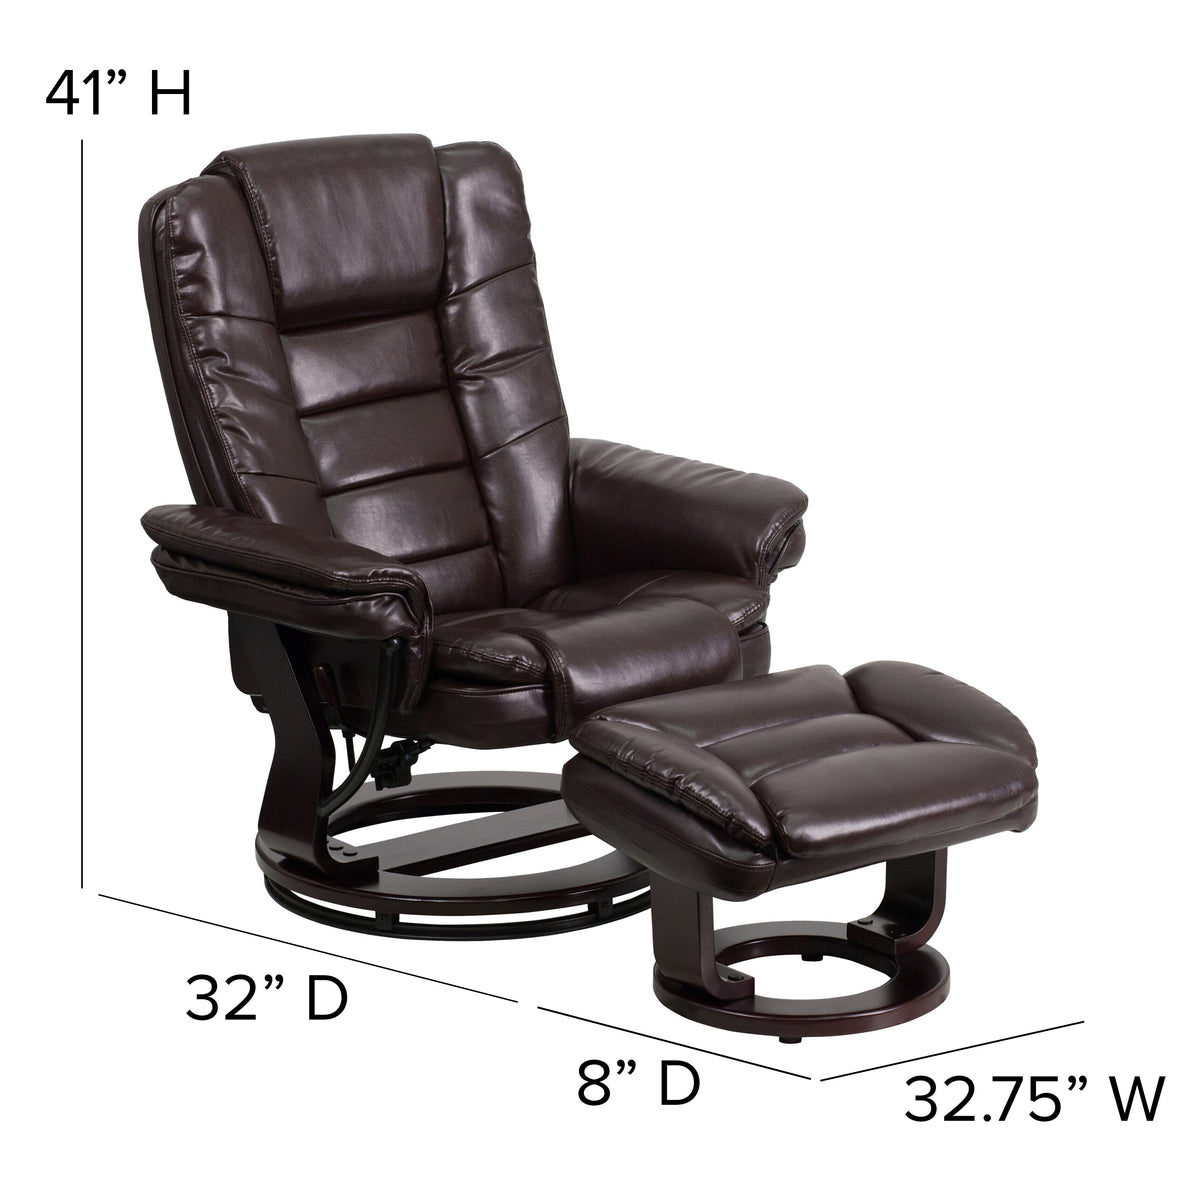 Brown |#| Brown LeatherSoft Multi-Position Recliner &Ottoman w/Swivel Mahogany Wood Base